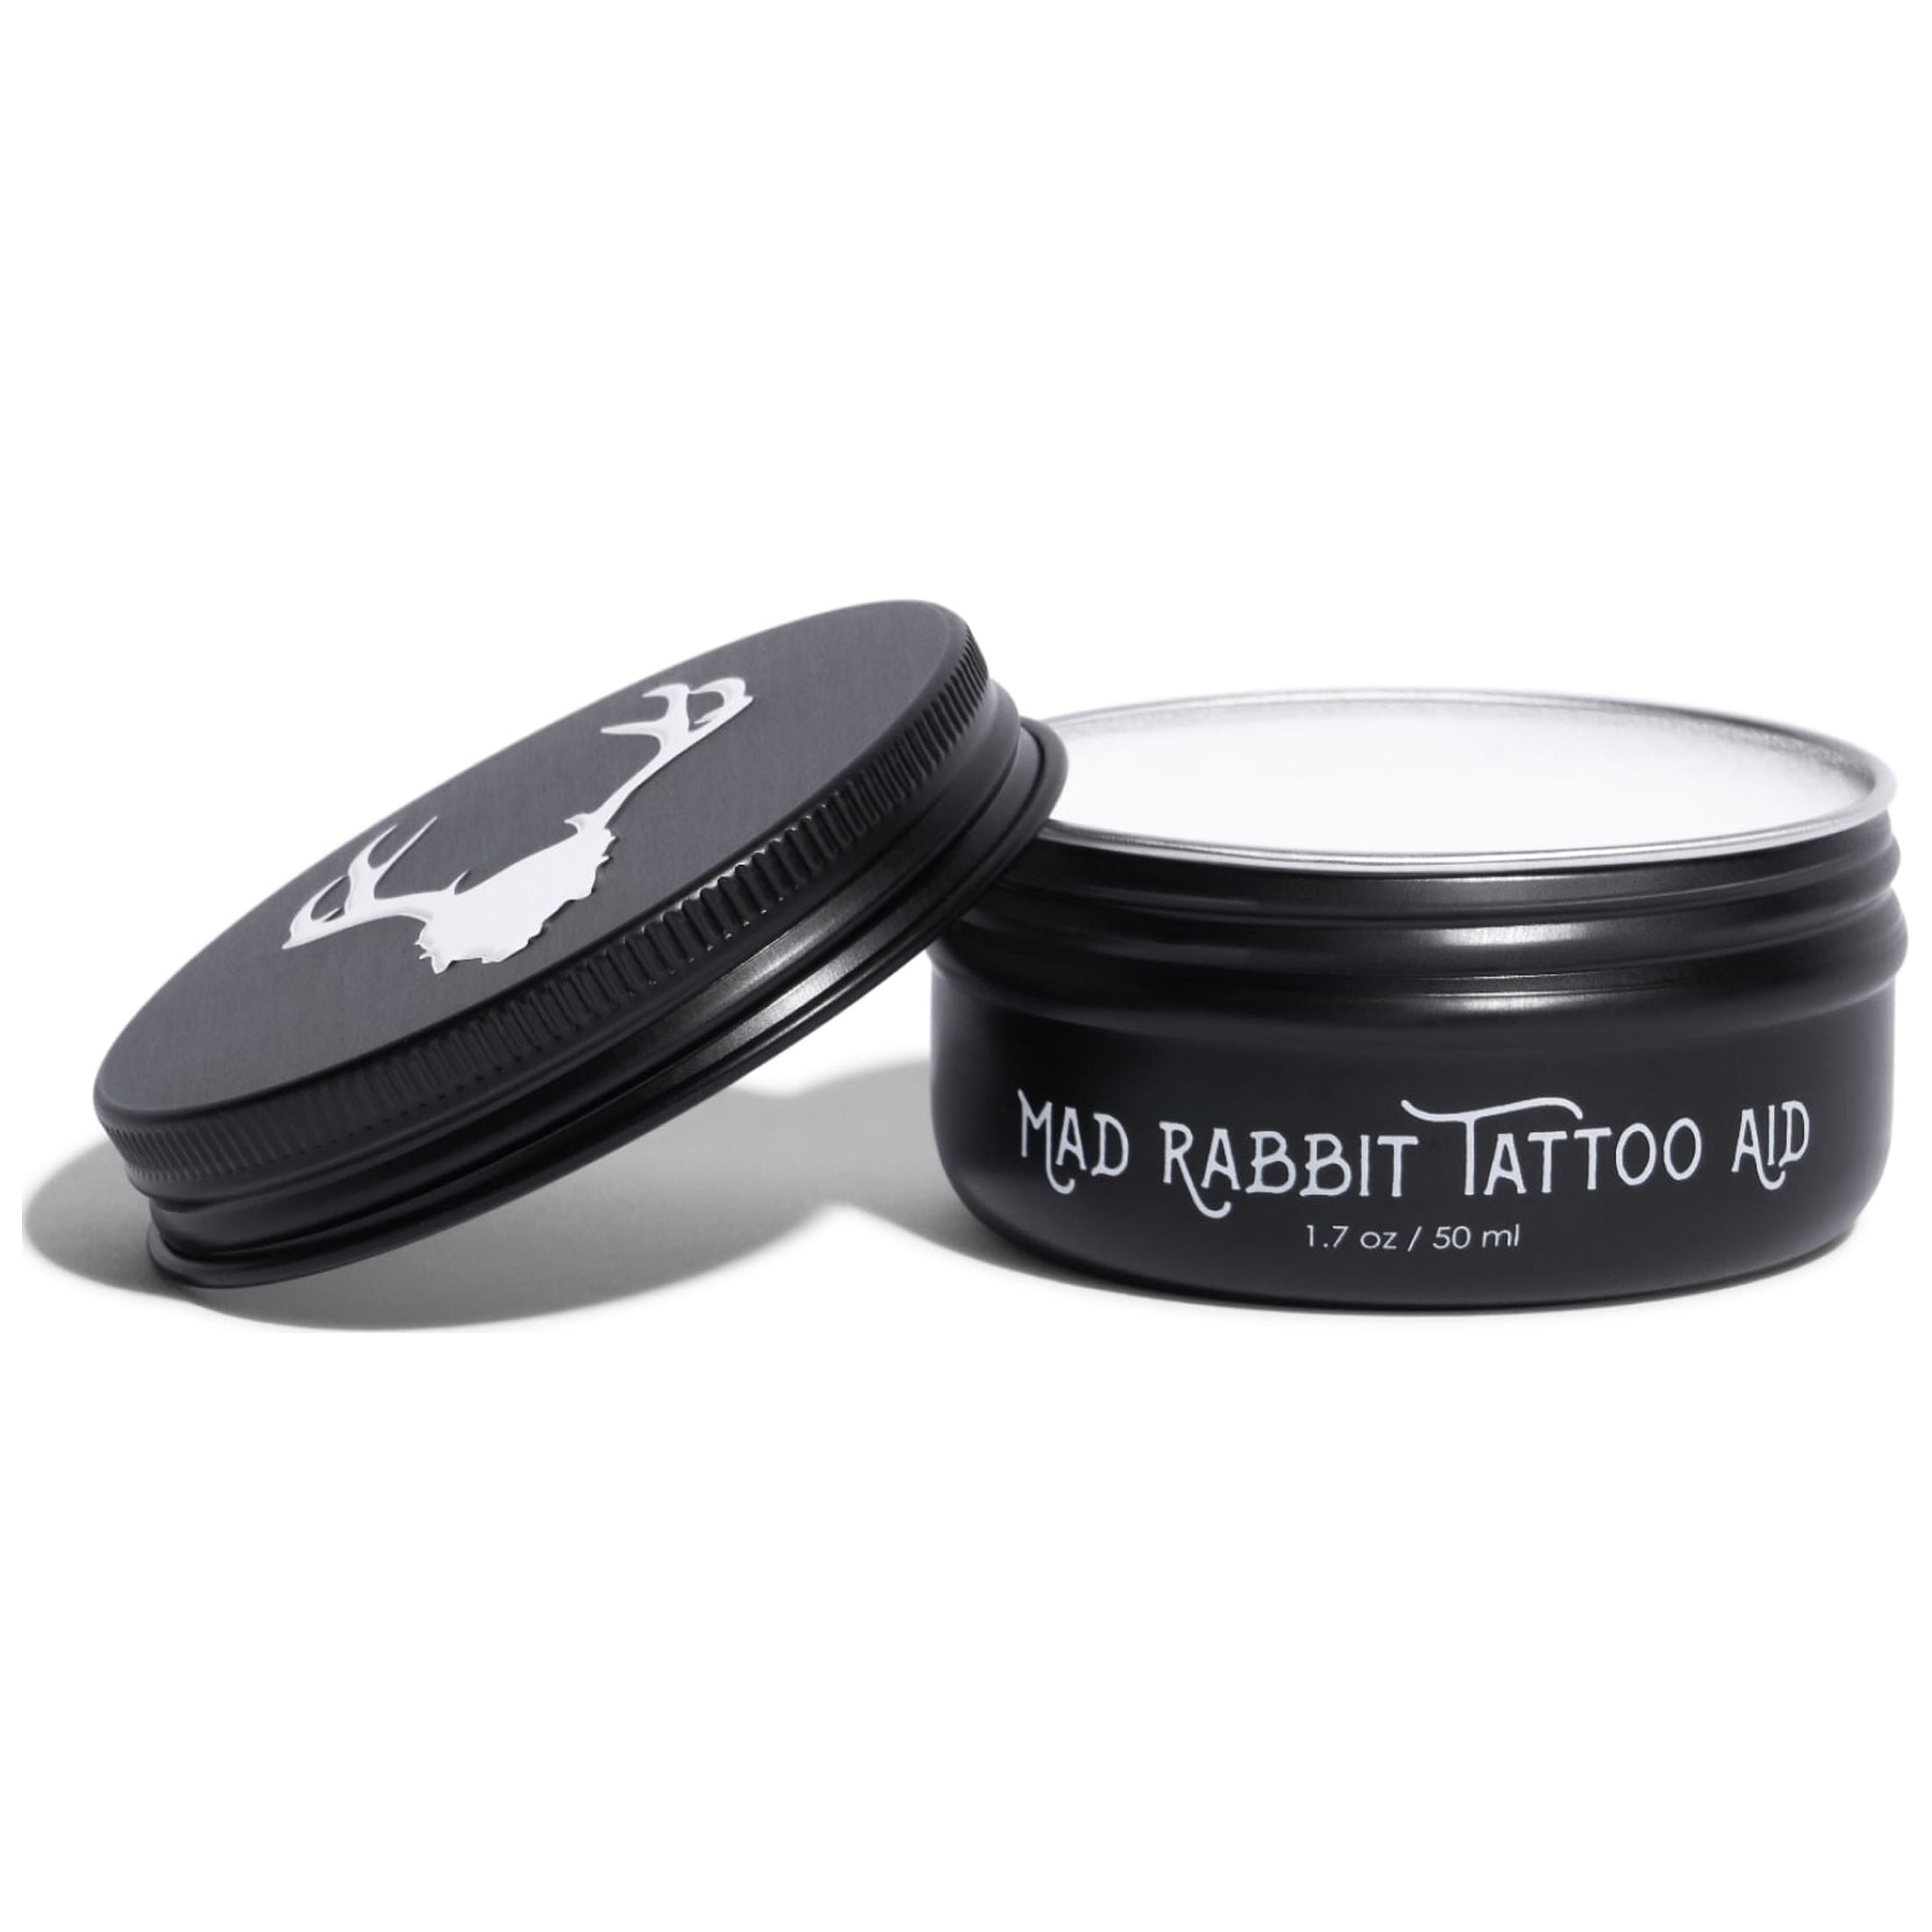  Mad Rabbit Tattoo Balm & Aftercare Cream - Tattoo Lotion for  Color Enhancement - Brightener & Moisturizing Ointment - Aftercare Salve to  Revive & Refresh Old Tattoos - Natural & Organic - (